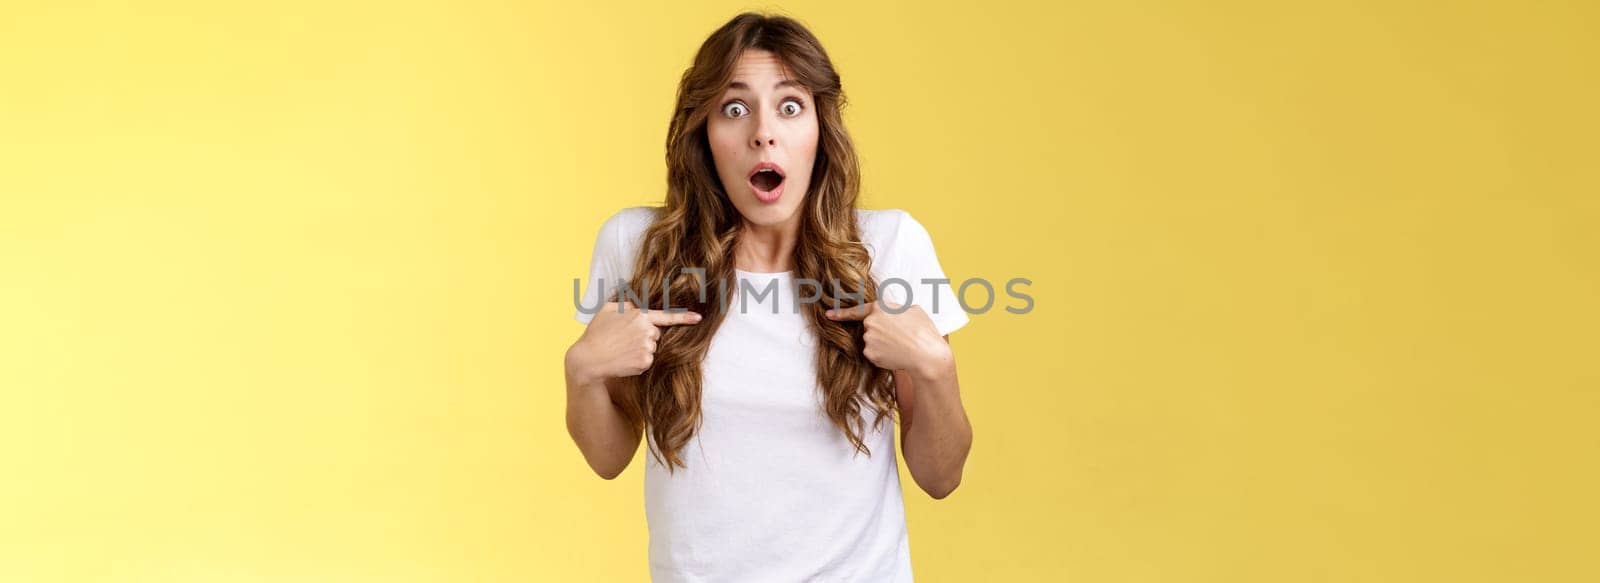 Shocked impressed speechless surprised girl gasping drop jaw pointing herself chest stare camera astonished unexpected promotion being chosen picked winning lottery stand yellow background.